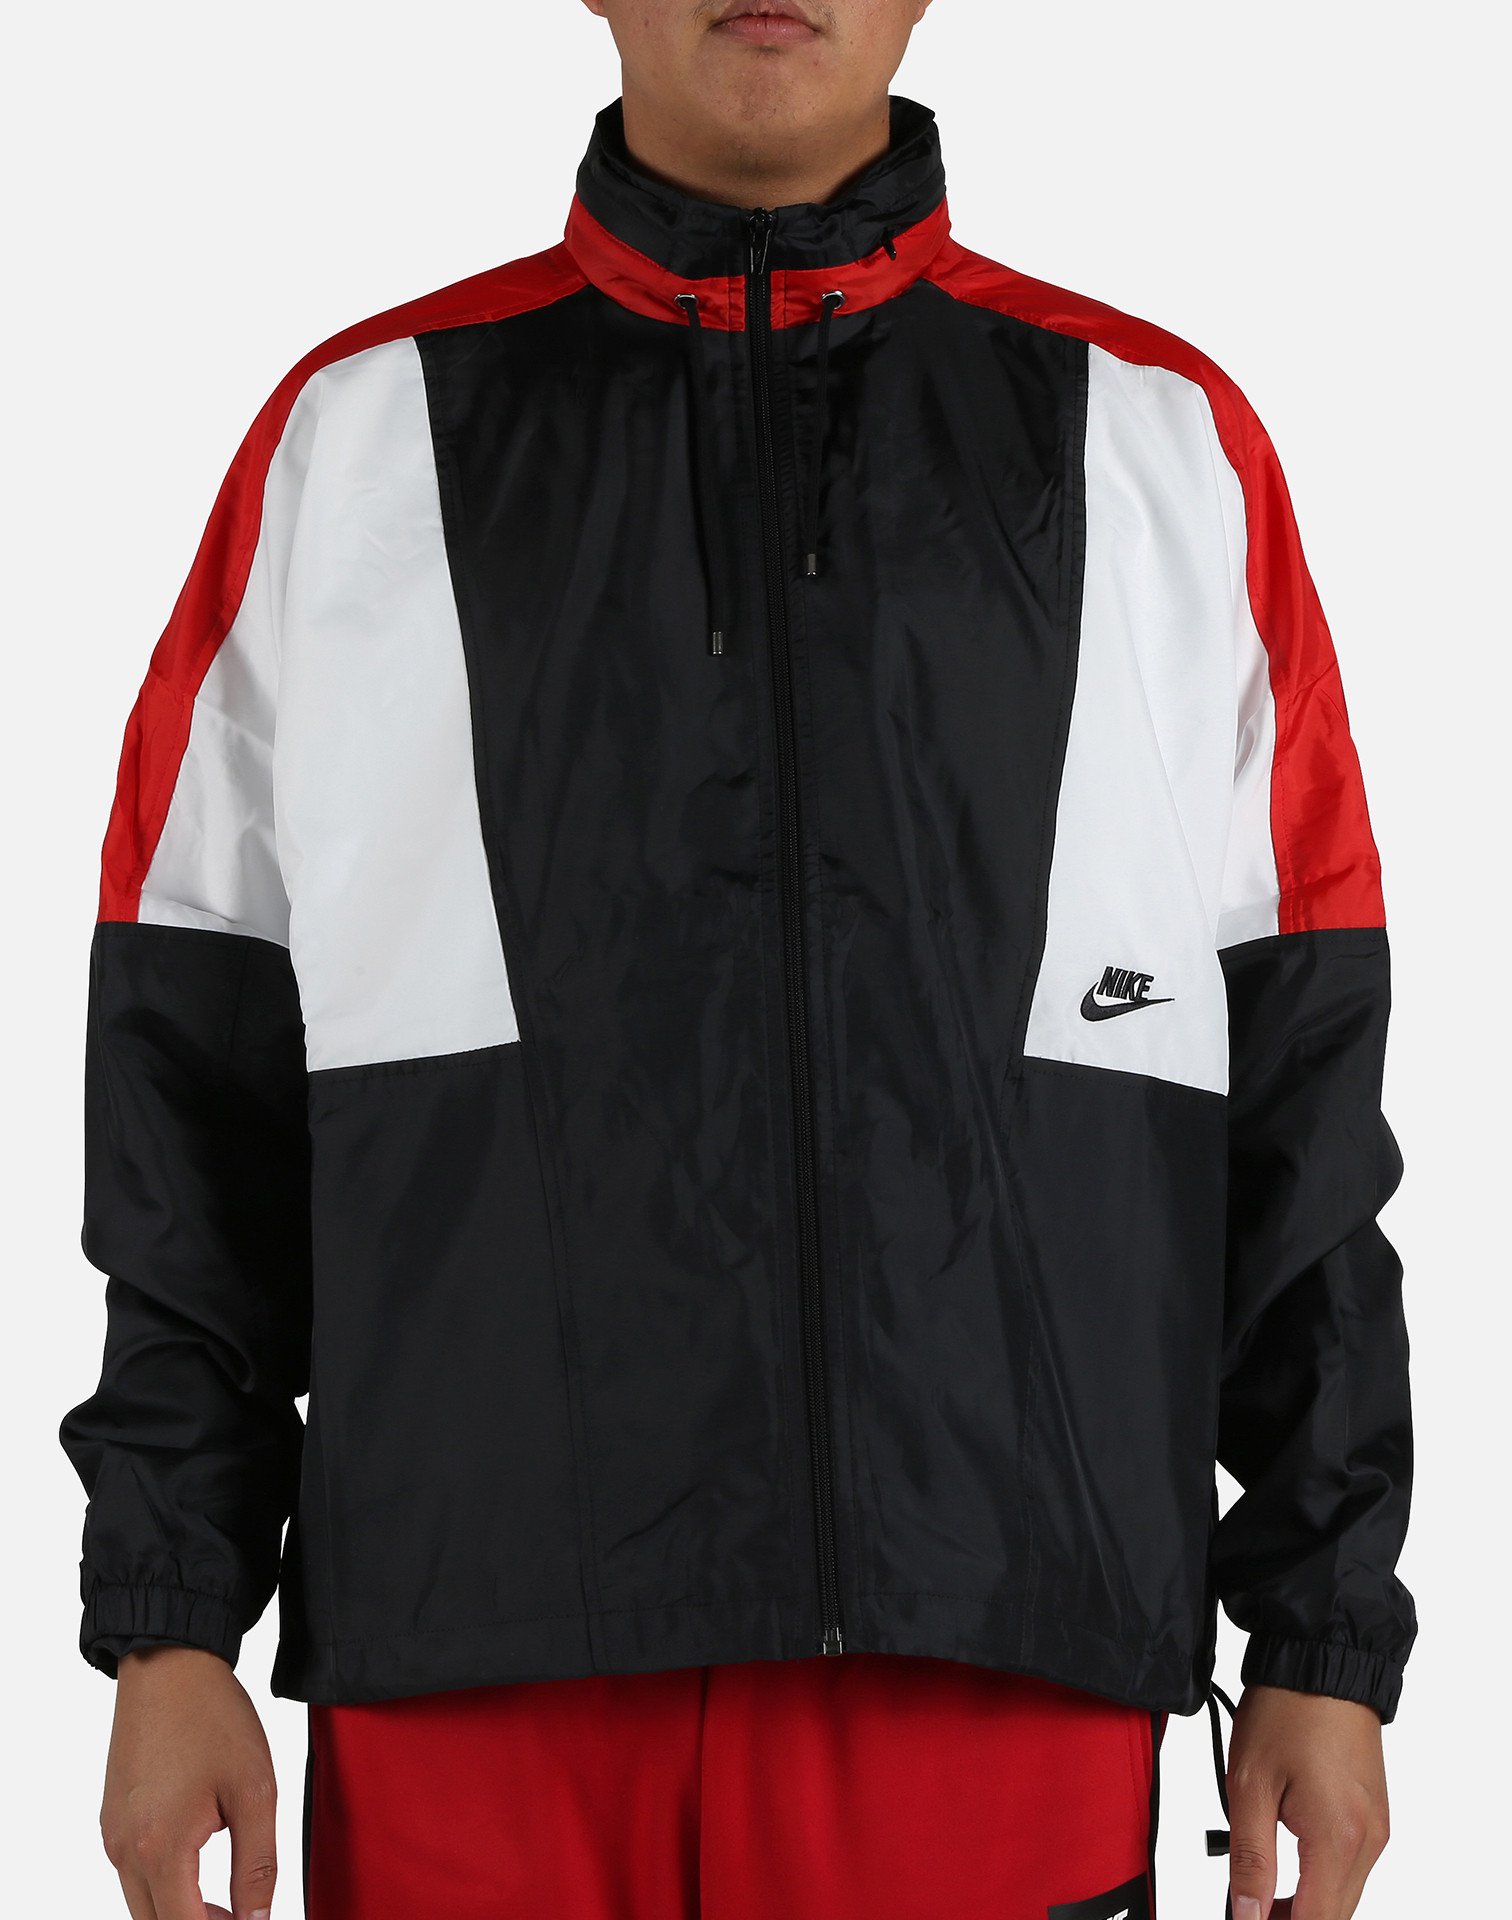 Now Available: Nike Sportswear DNA Re-Issue Retro Jacket — Sneaker Shouts